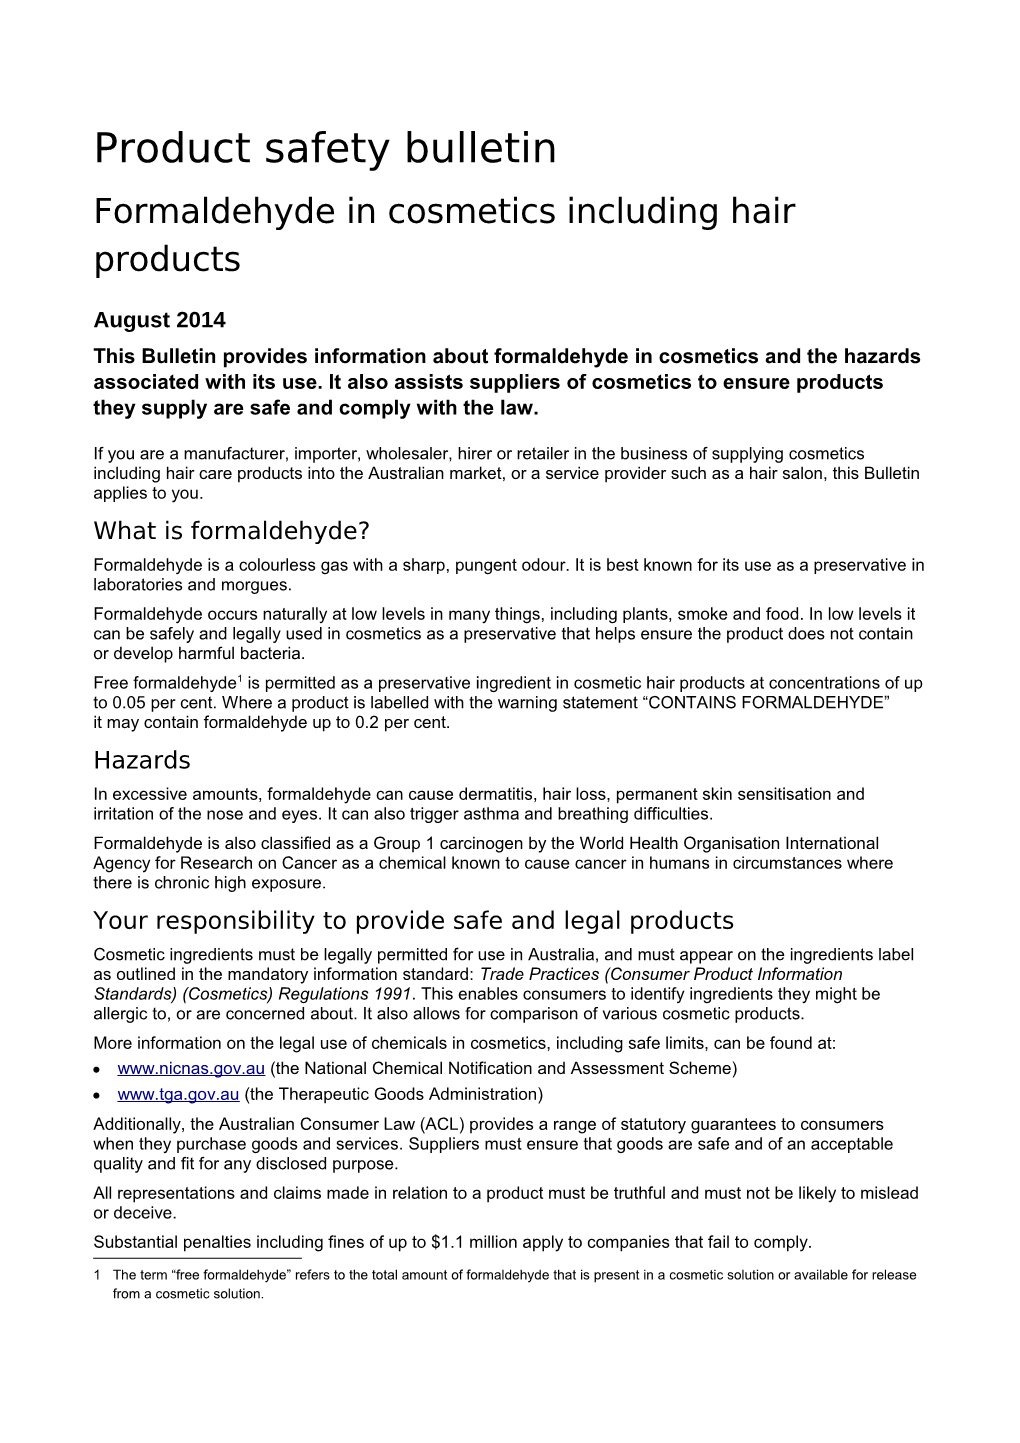 Formaldehyde in Cosmetics Including Hair Products